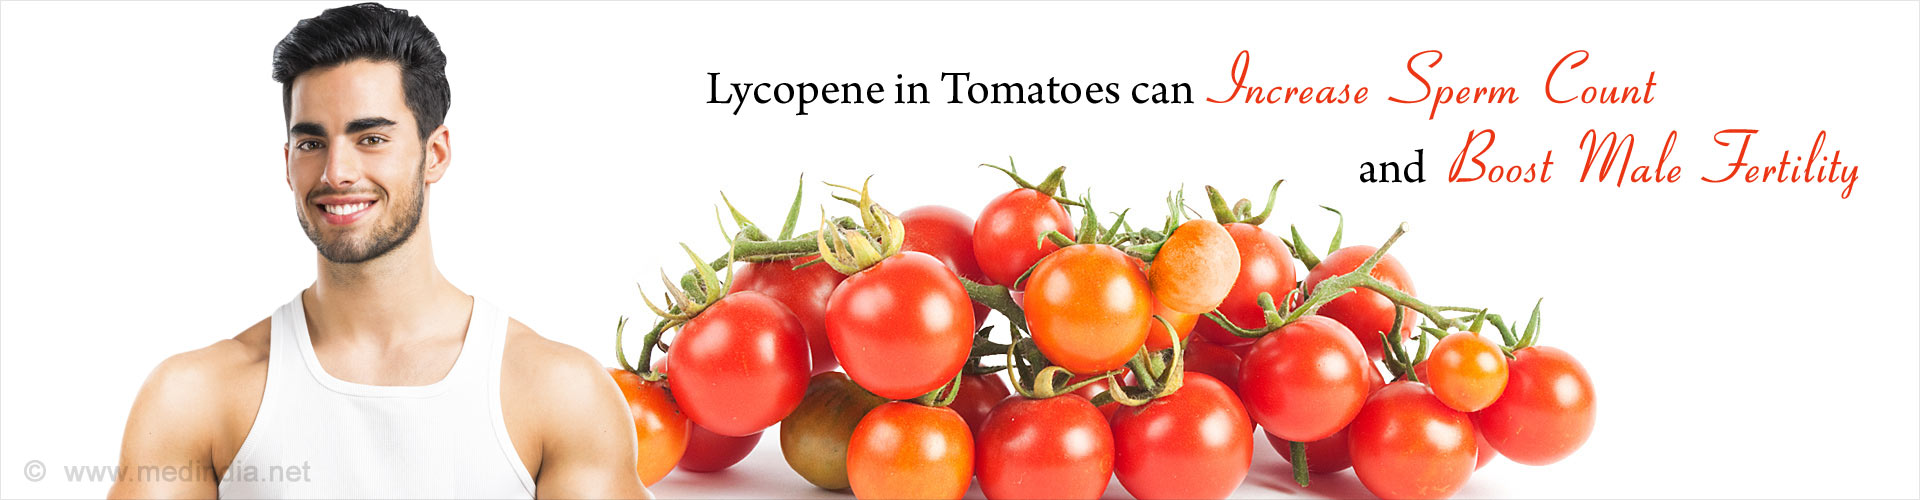 Lycopene in Tomatoes Can Increase Sperm Count and Boost Male Fertility
